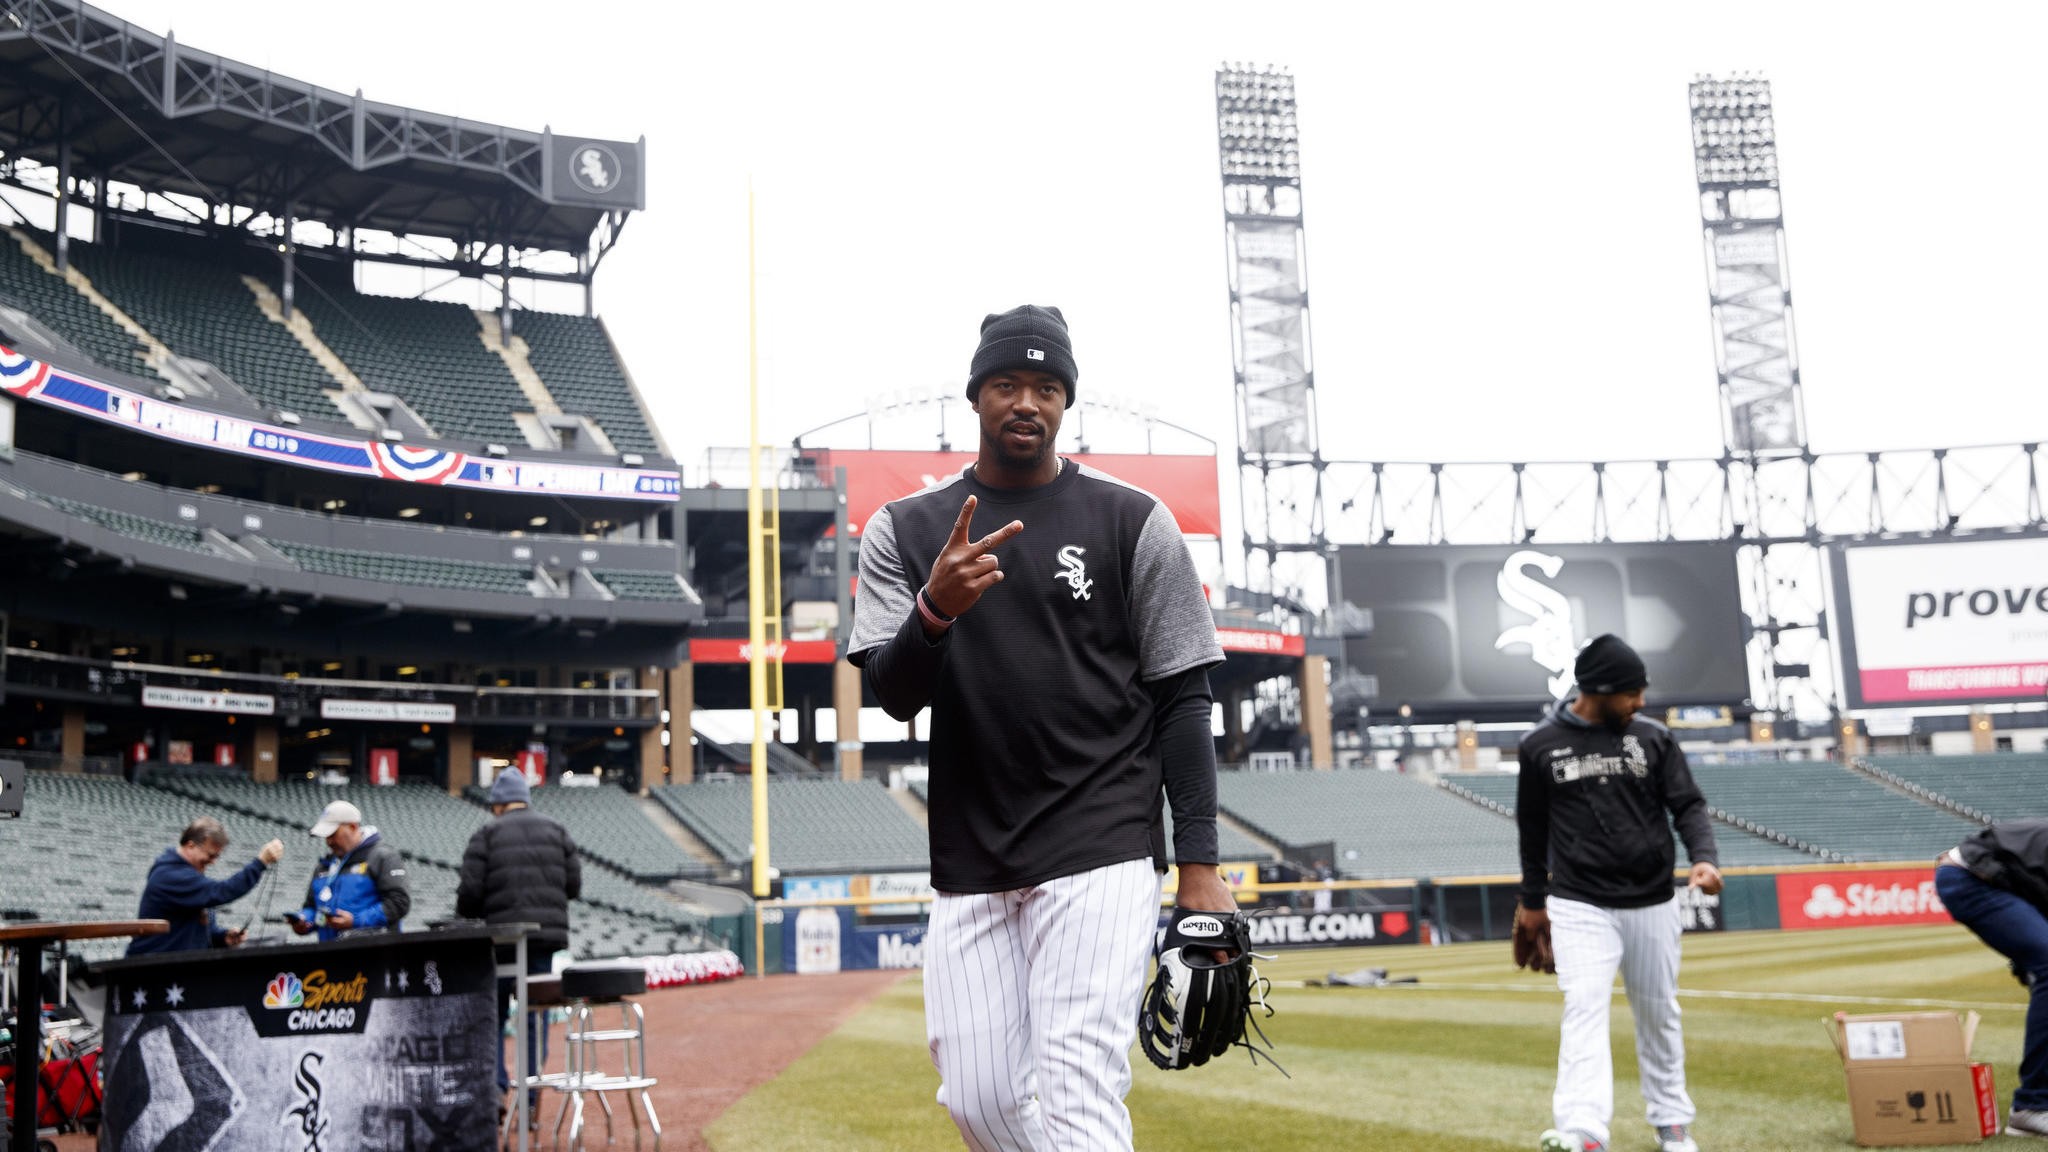 Good news at White Sox home opener New digitalonly ticketing goes